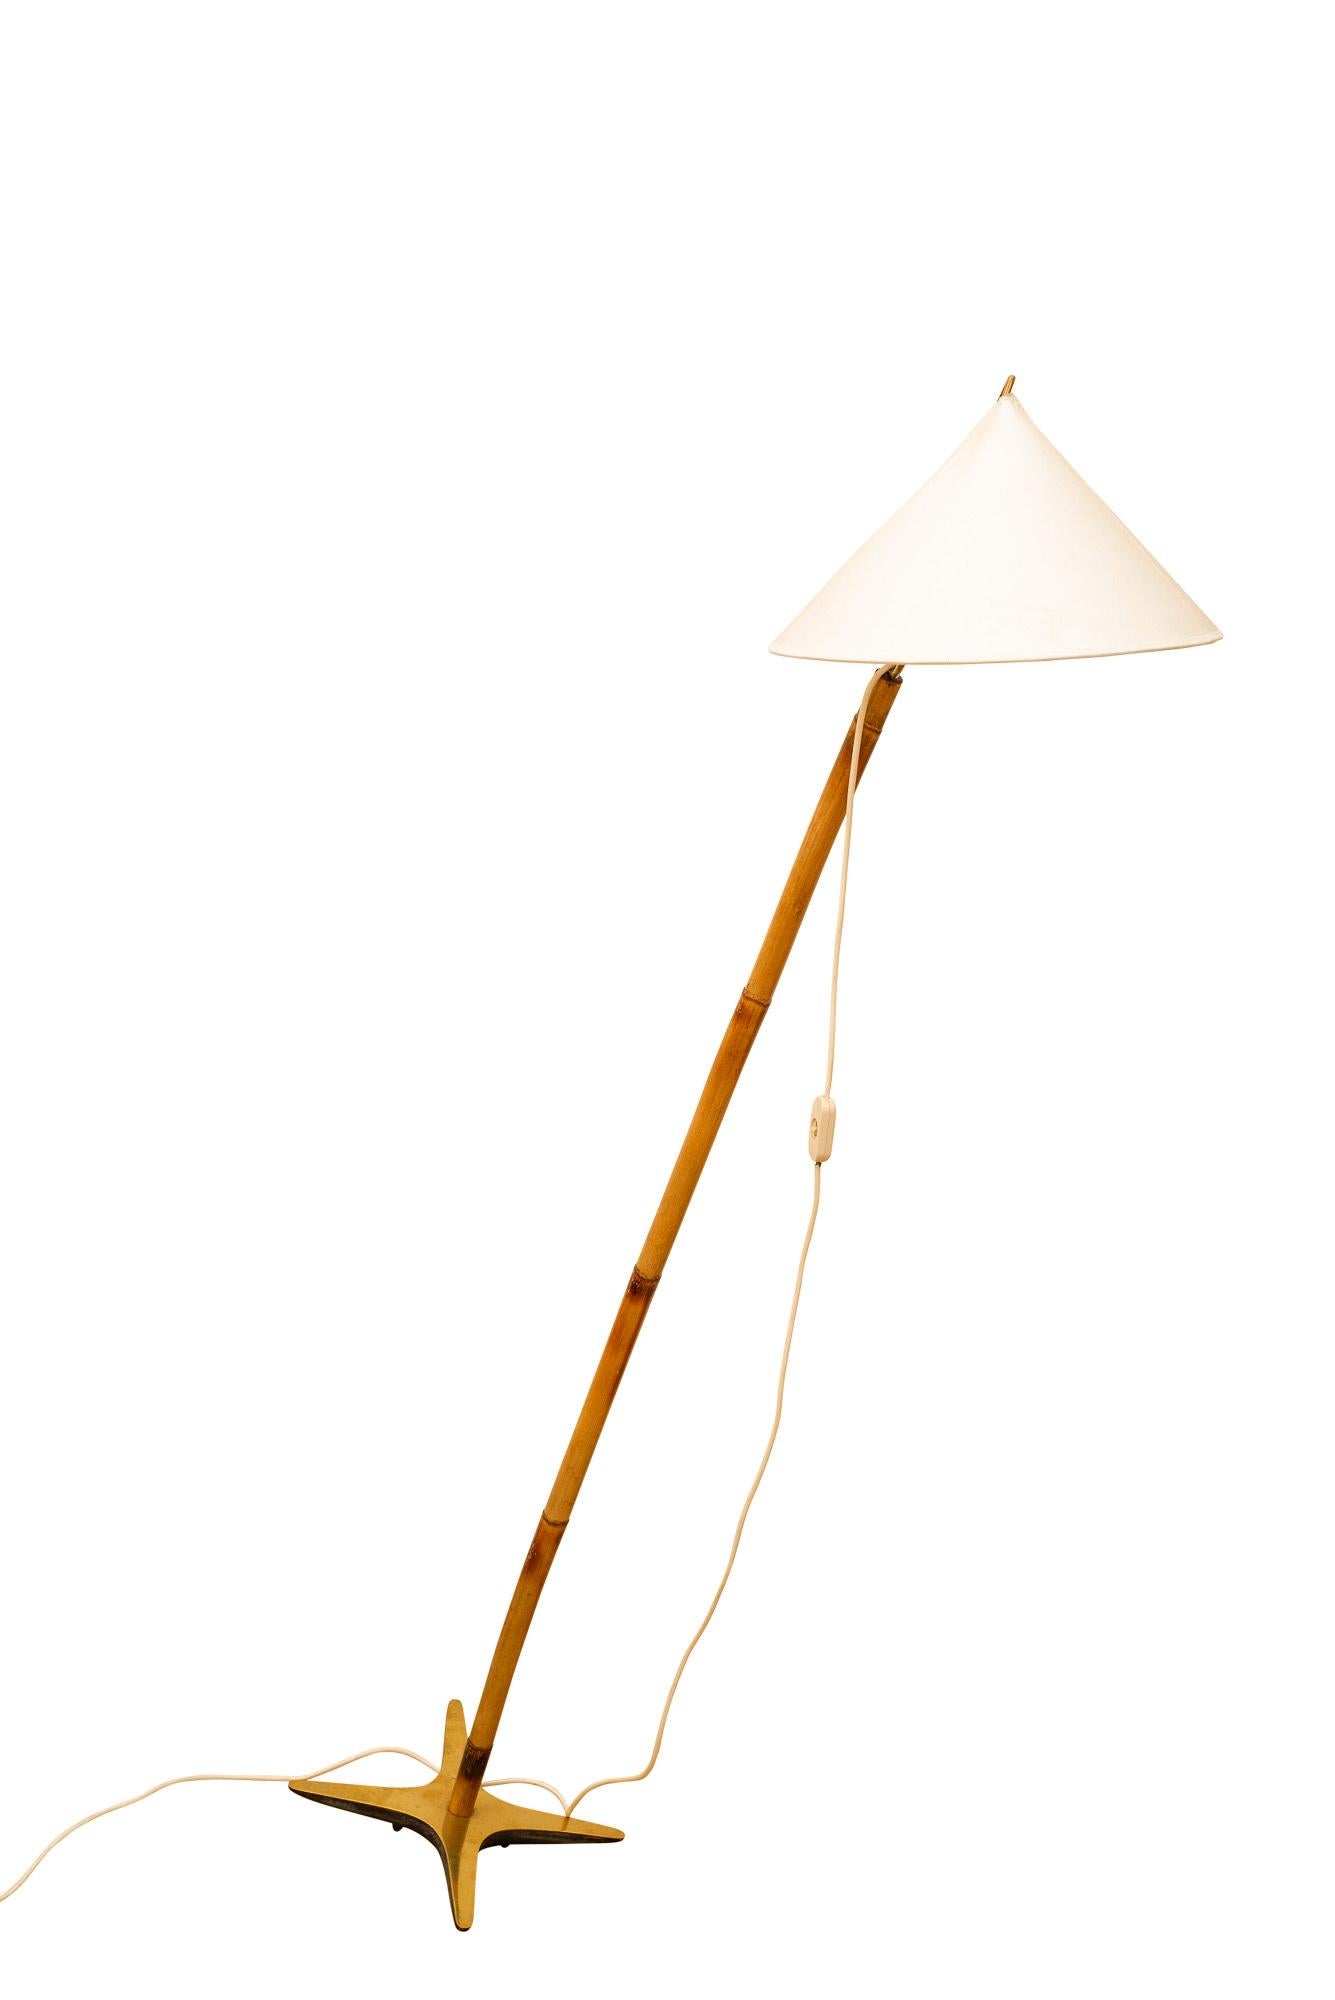 Carl Auböck „X“ Floor Lamp Model No. 3740 circa 1940 Brass Bamboo Midcentury In Excellent Condition For Sale In Vienna, AT